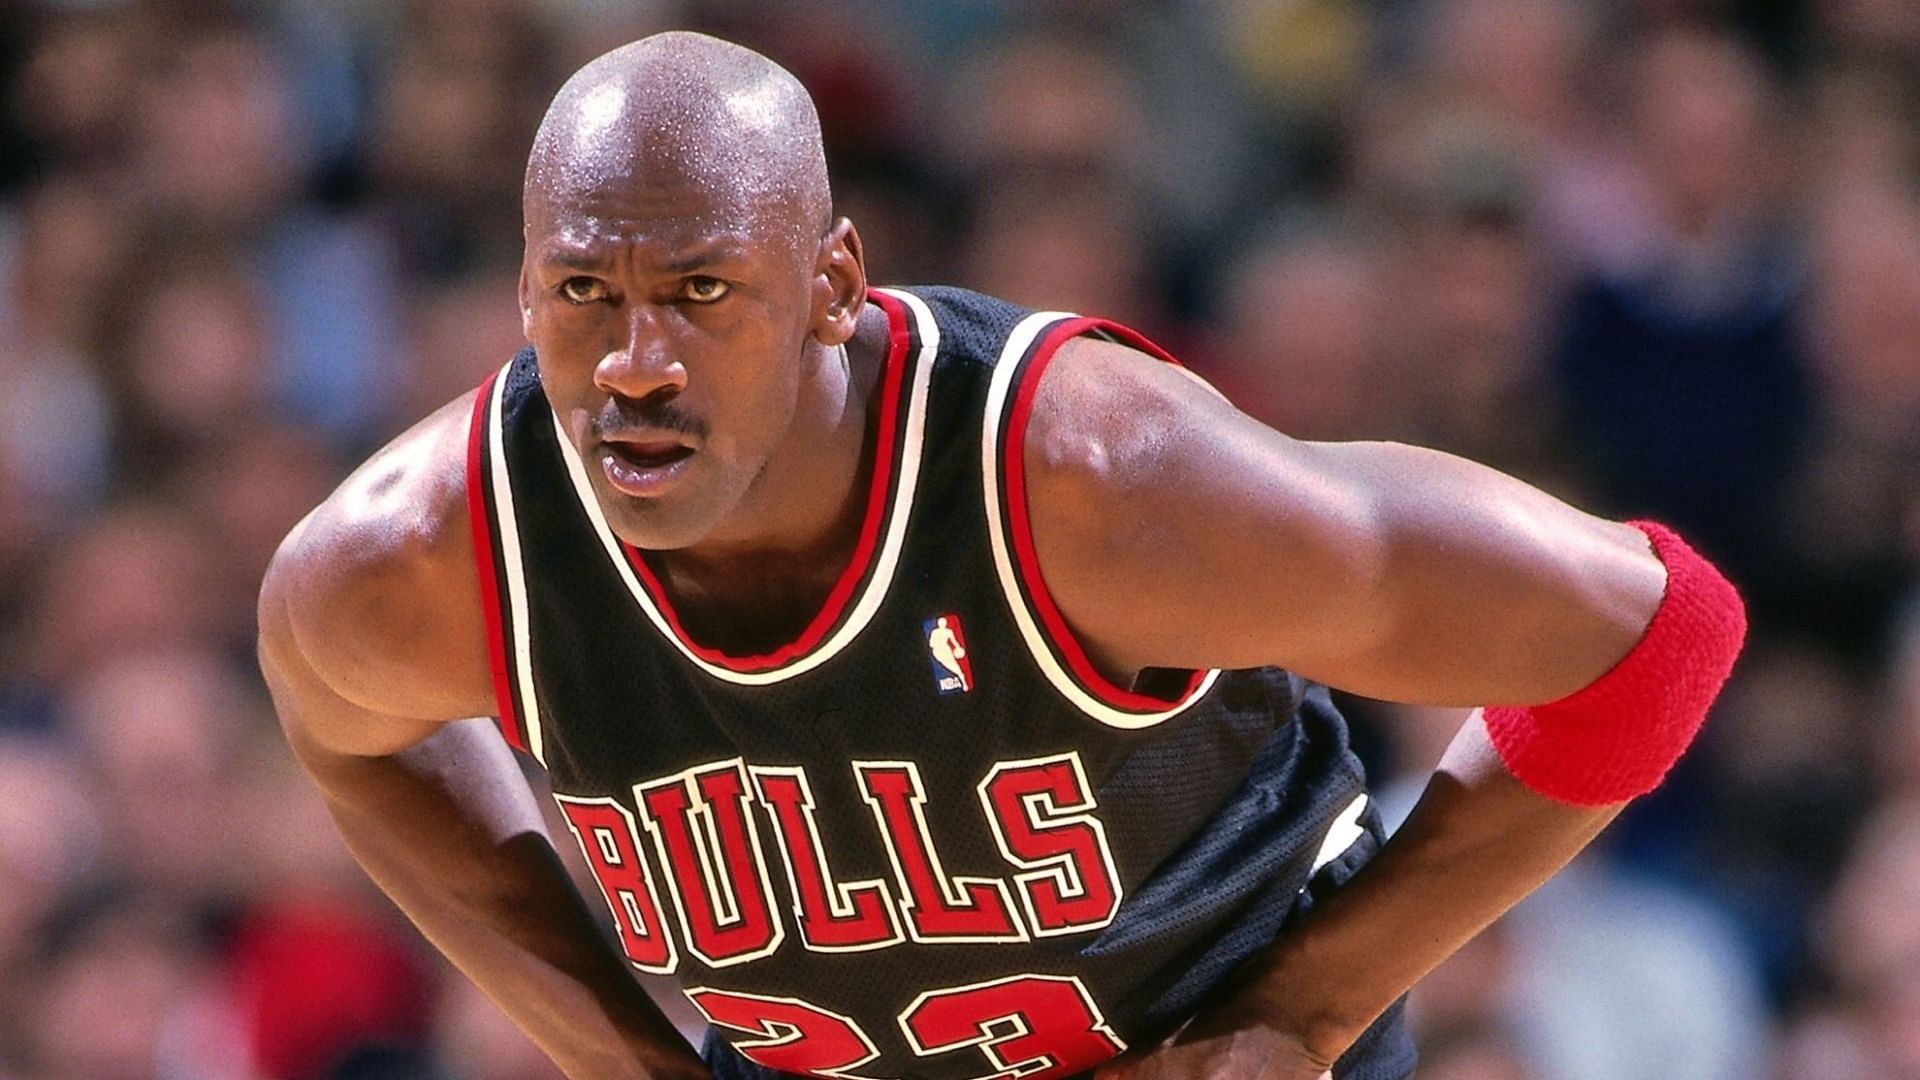 MJ in action for the Chicago Bulls